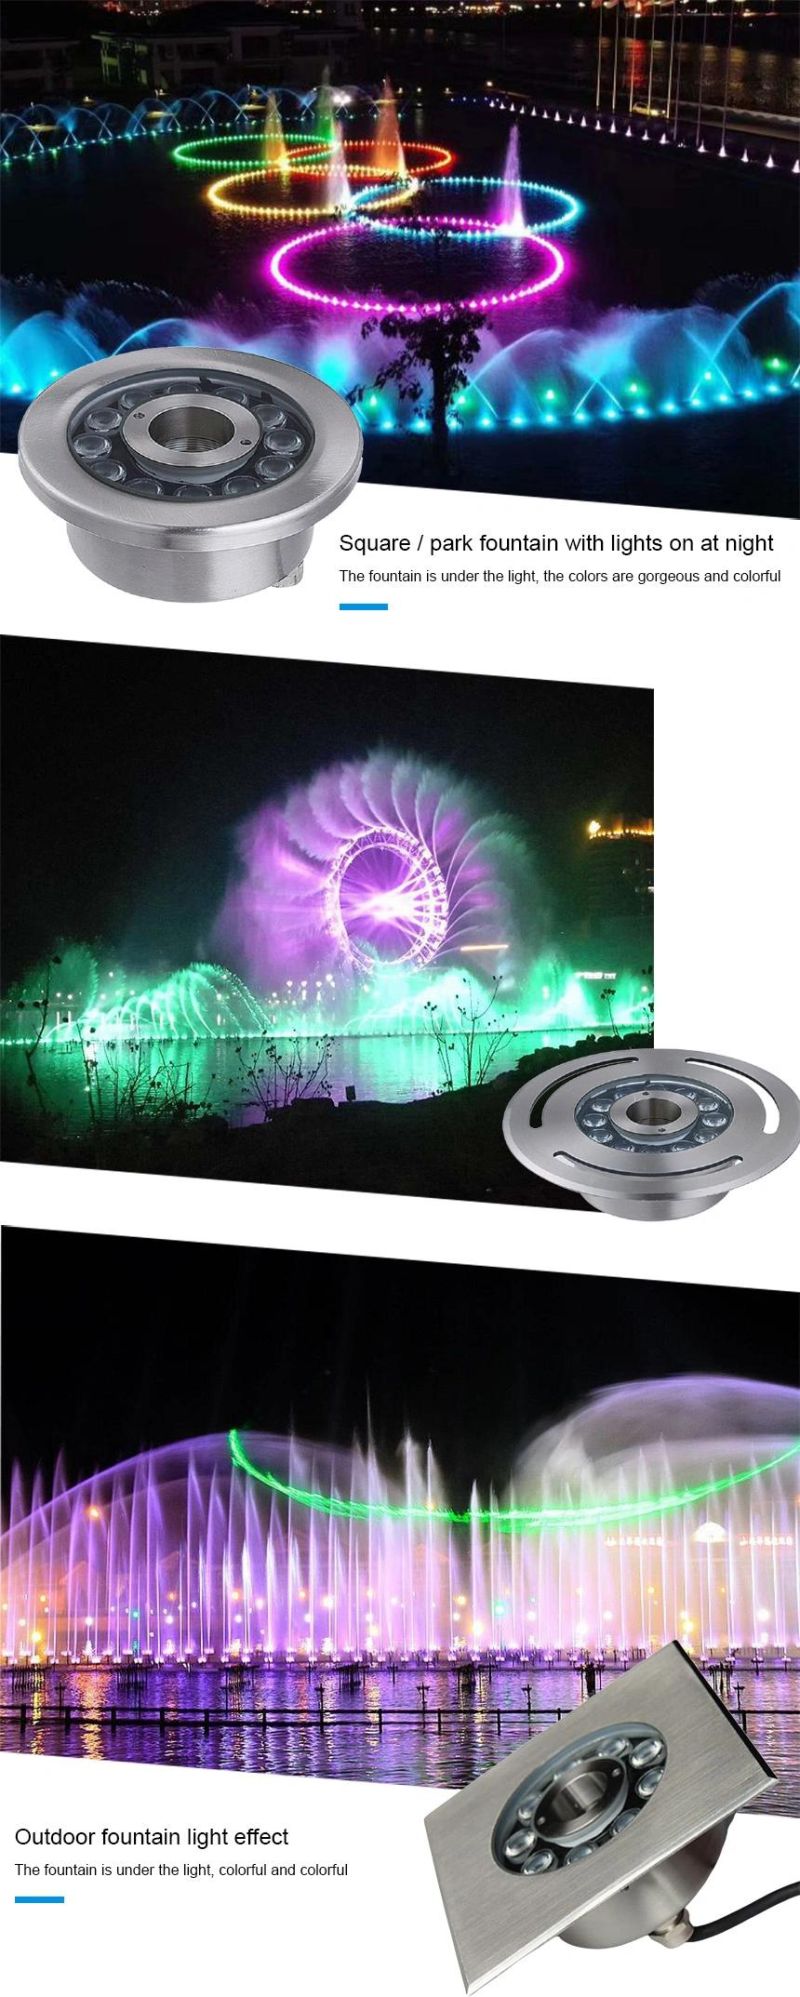 IP68 Stainless Steel Pond Waterproof Swimming Pool LED Underwater Light for Fountain